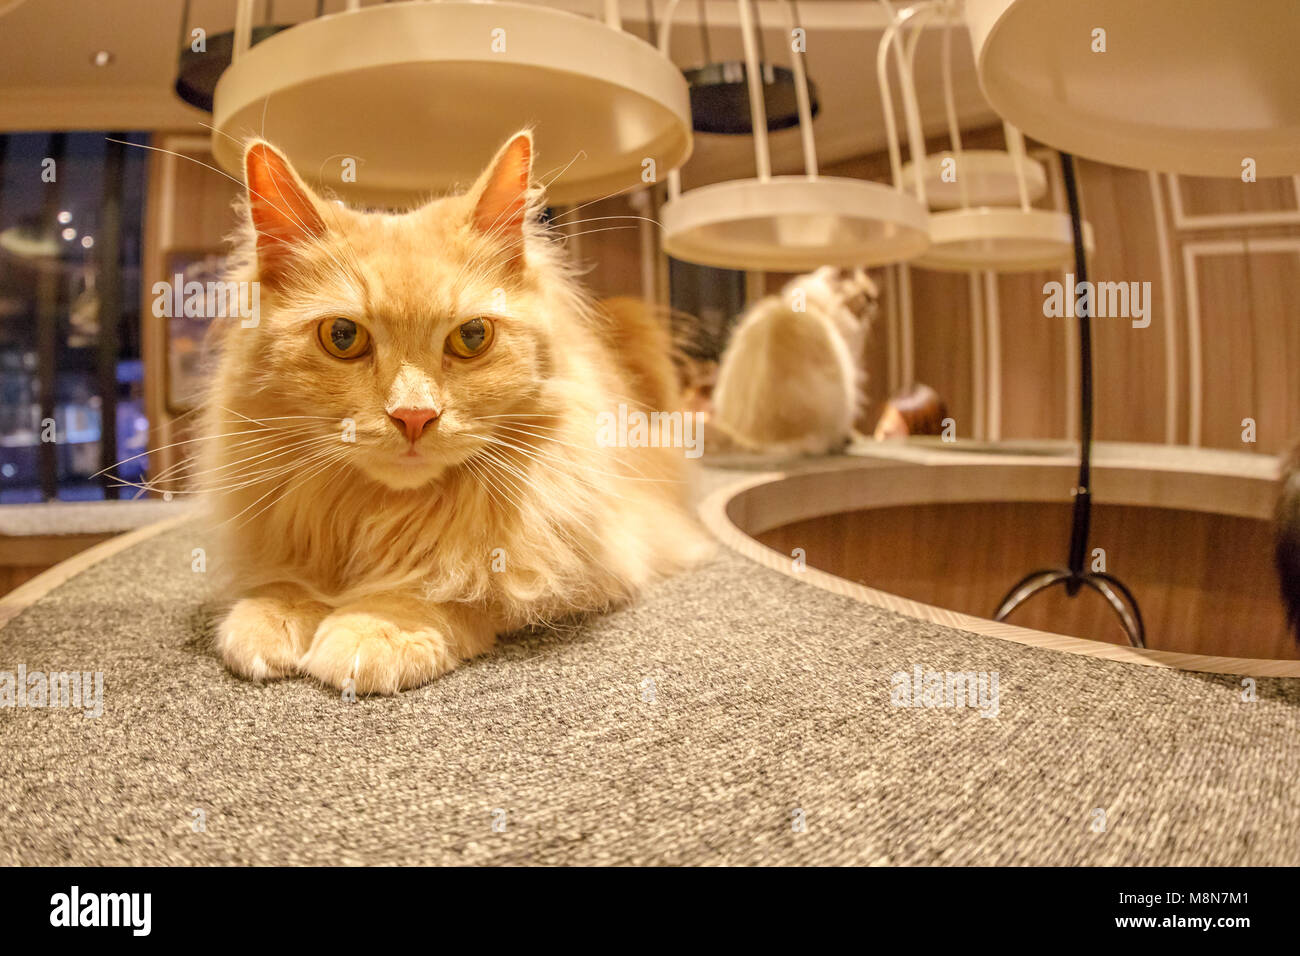 Tokyo, Japan - April 17, 2017: close-up of Turkish Angora cat sitting inside of Cat Cafe Mocha in Shibuya District. The Japanese who go to the Cat Cafe decreases anxiety and stress. Stock Photo